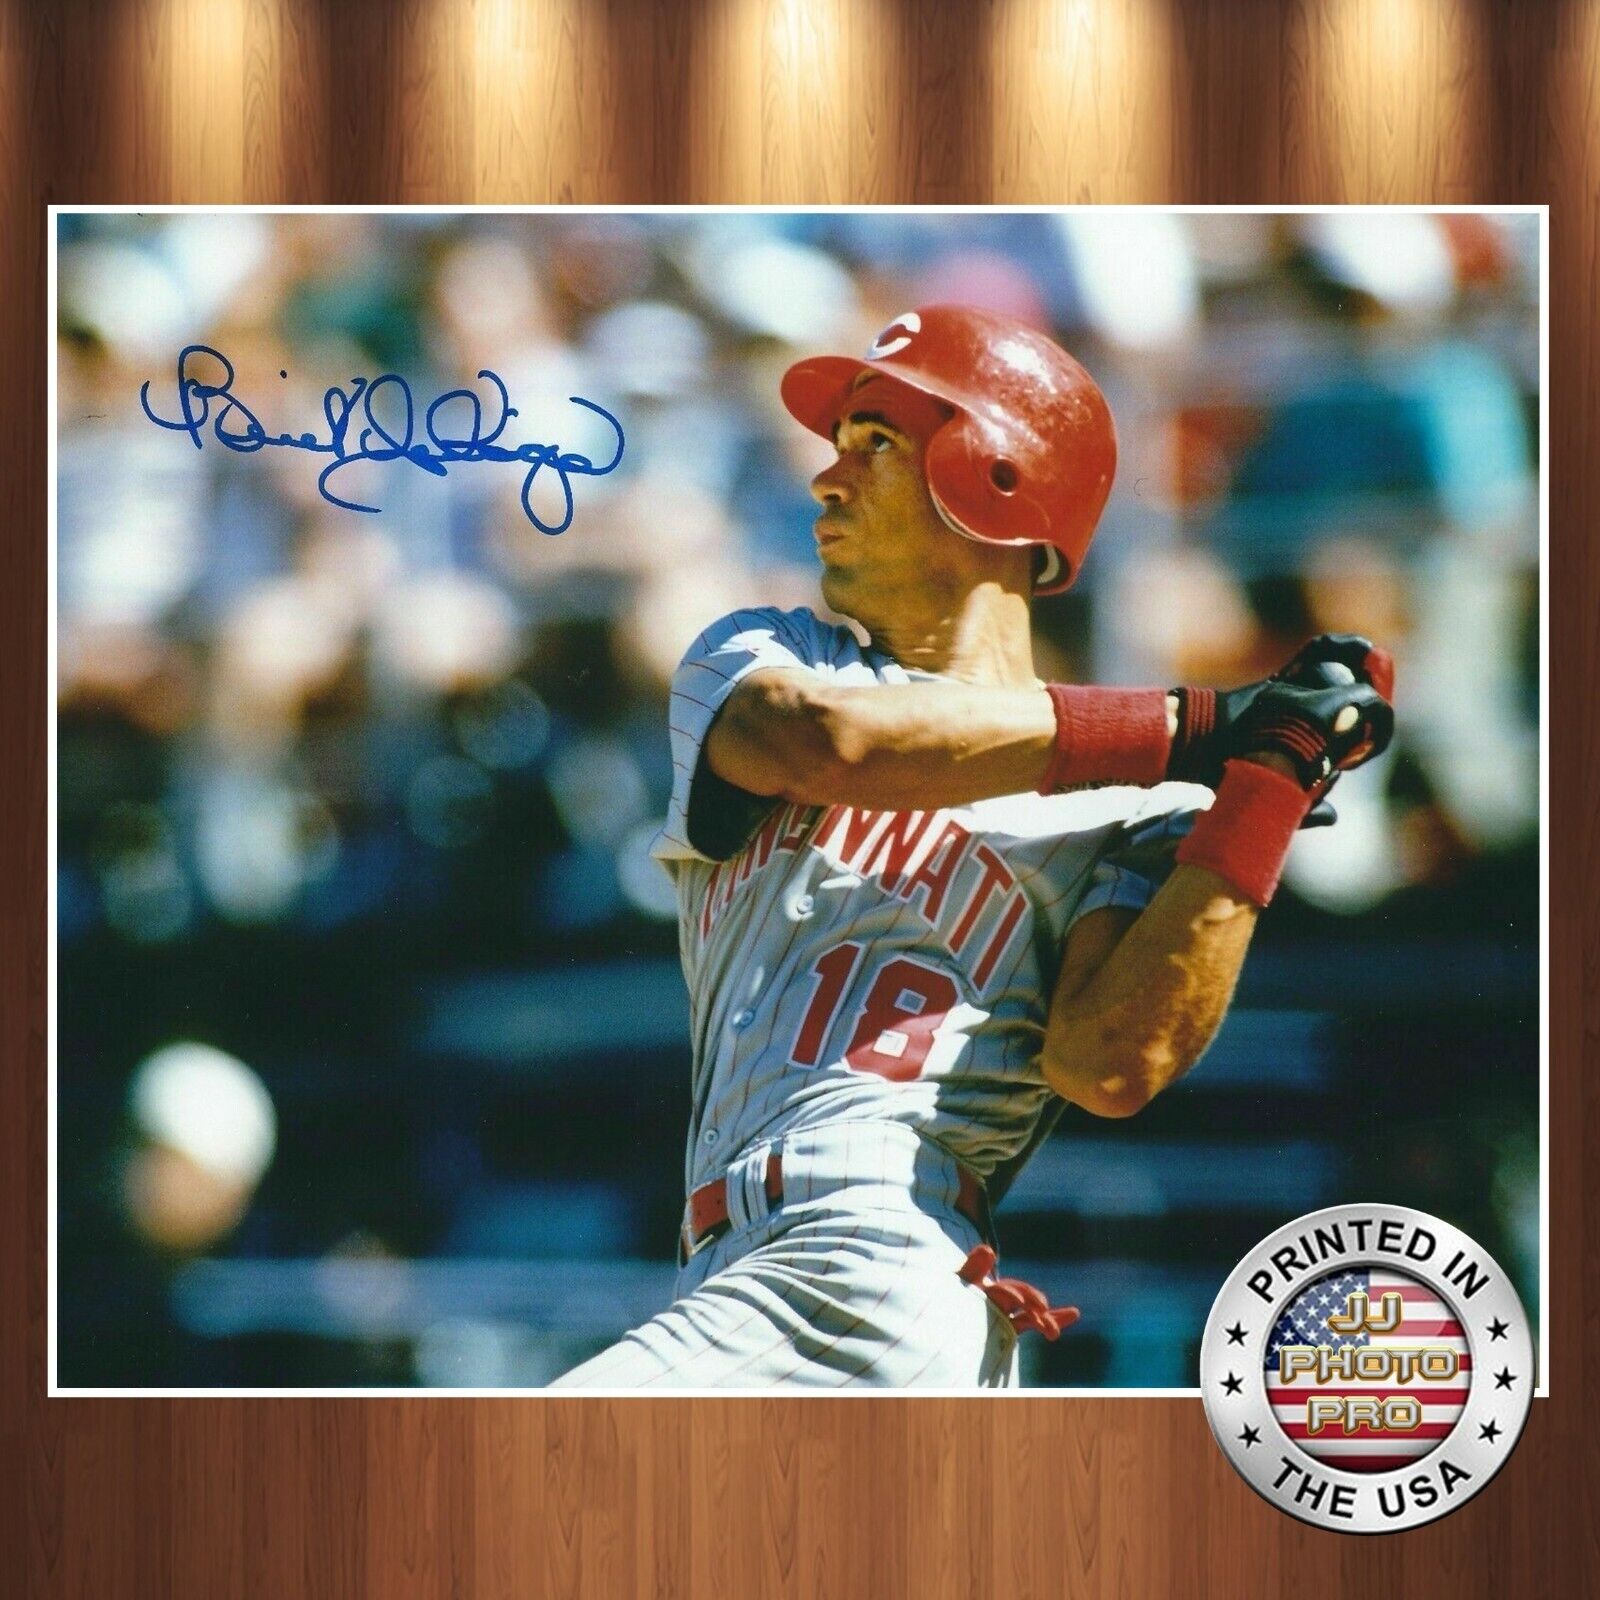 Benito Santiago Autographed Signed 8x10 Photo Poster painting (Reds) REPRINT